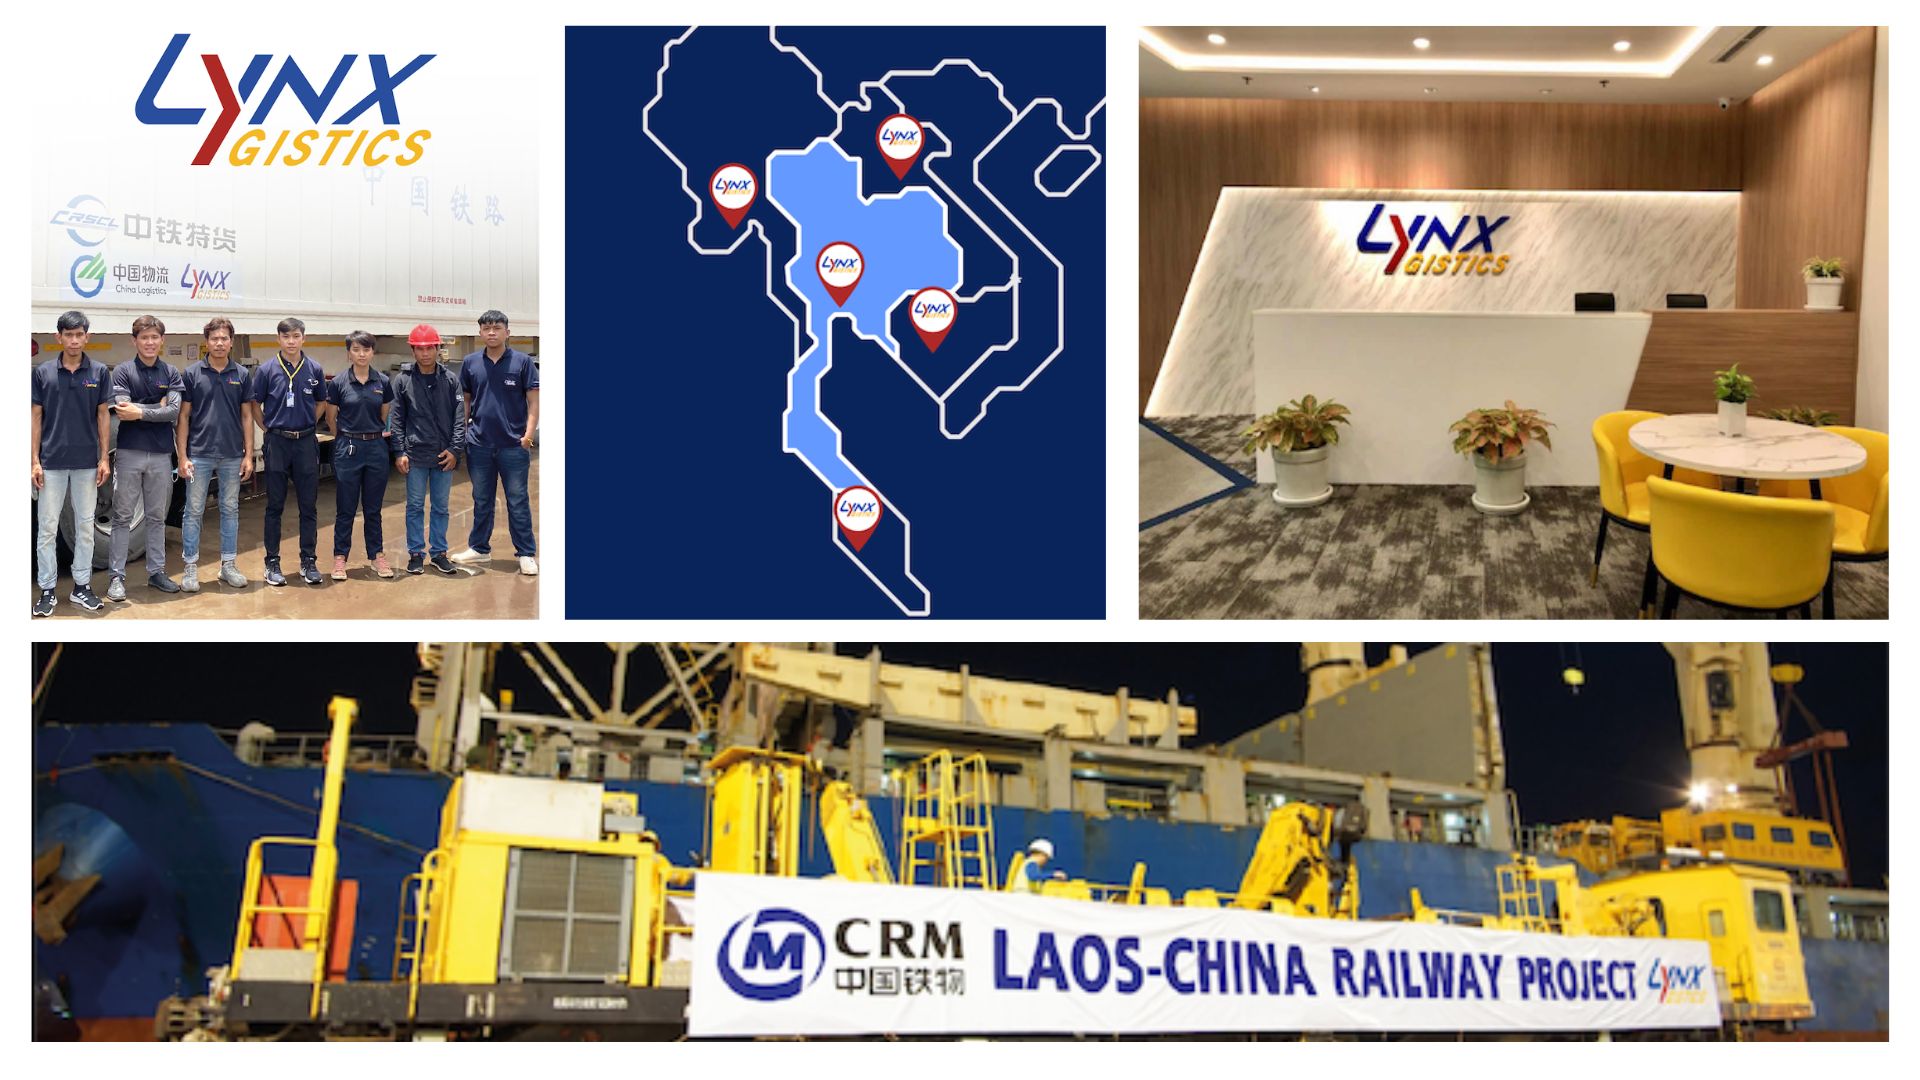 LYNXGISTICS INTER FREIGHT (Thailand and Myanmar) Solid geographical presence and expanding service coverage